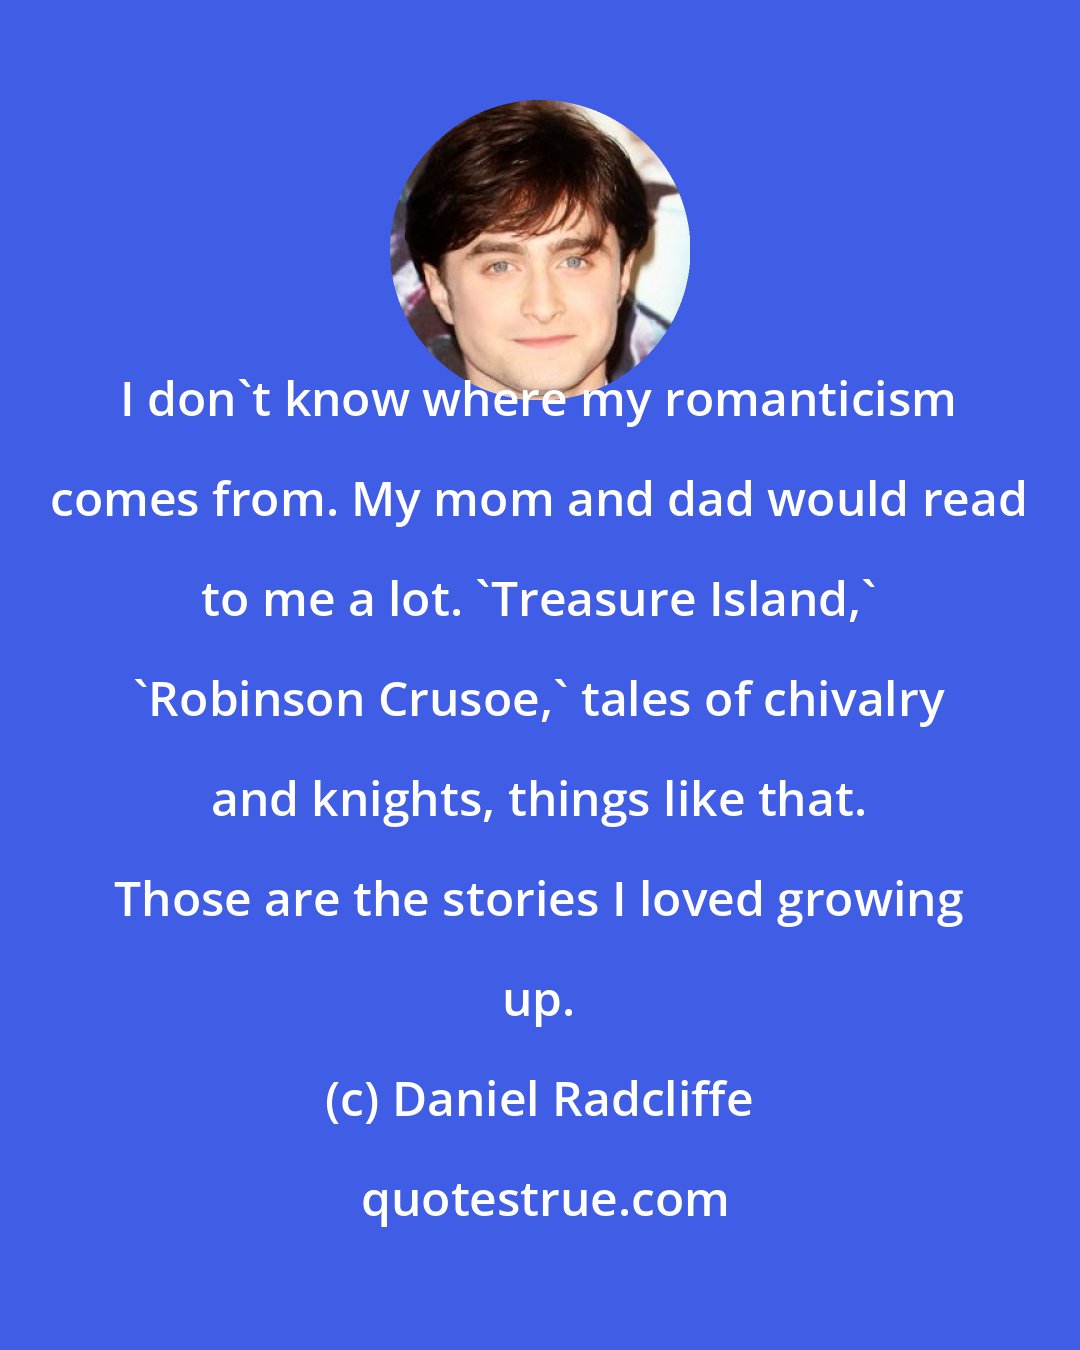 Daniel Radcliffe: I don't know where my romanticism comes from. My mom and dad would read to me a lot. 'Treasure Island,' 'Robinson Crusoe,' tales of chivalry and knights, things like that. Those are the stories I loved growing up.